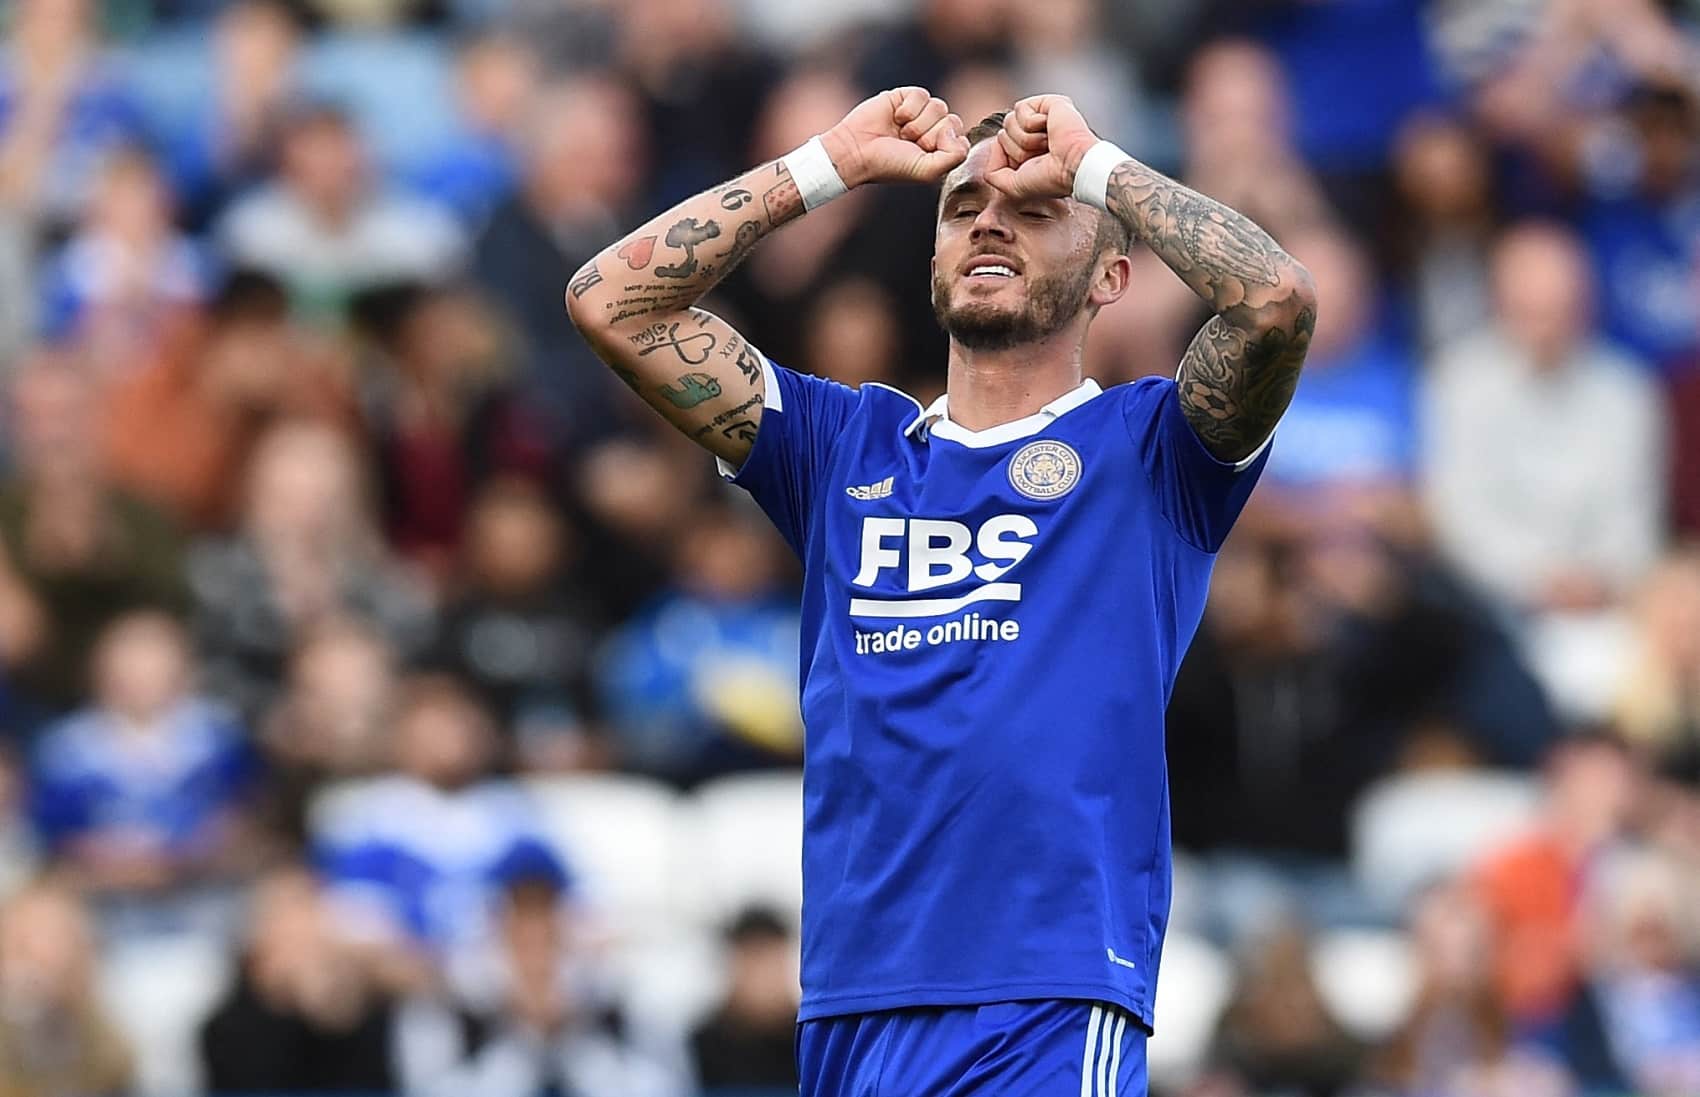 FPL review: Maddison to miss Gameweek 12 + Mitrovic discusses fitness